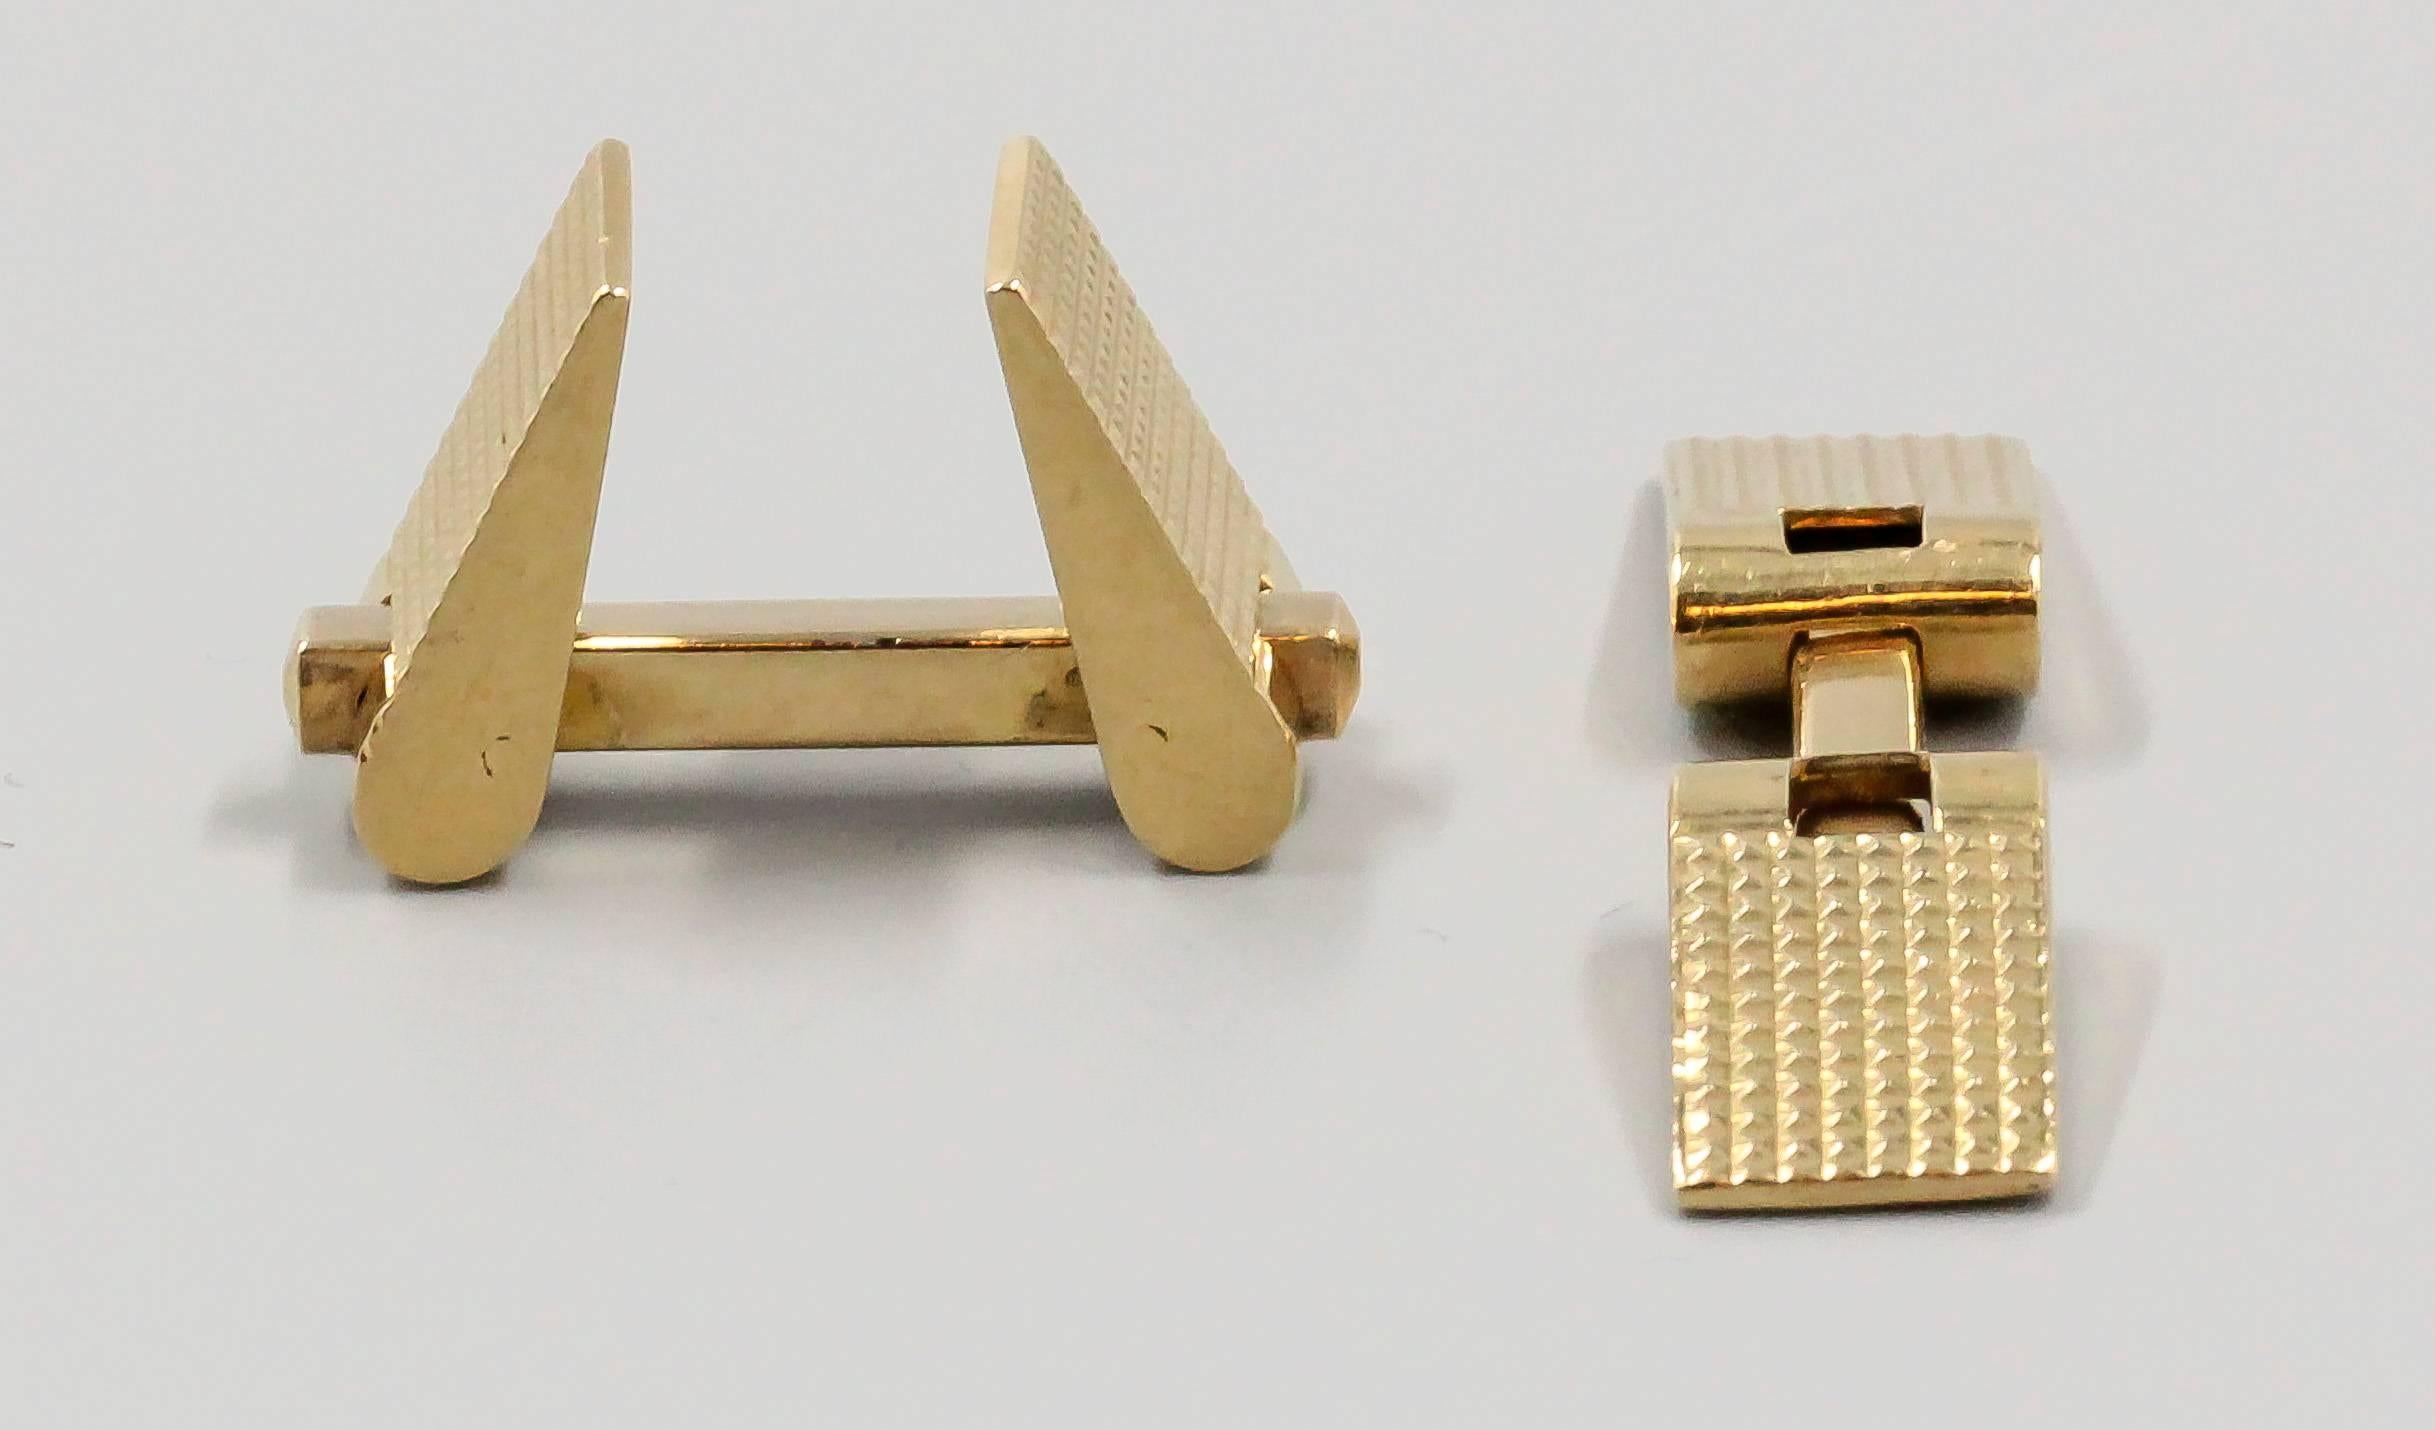 Unusual 18K yellow gold textured cufflinks of French origin, circa 1950s-60s. They feature a spring loaded folding mechanism for ease of installation.
Hallmarks: French 18K gold assay marks, maker's mark.